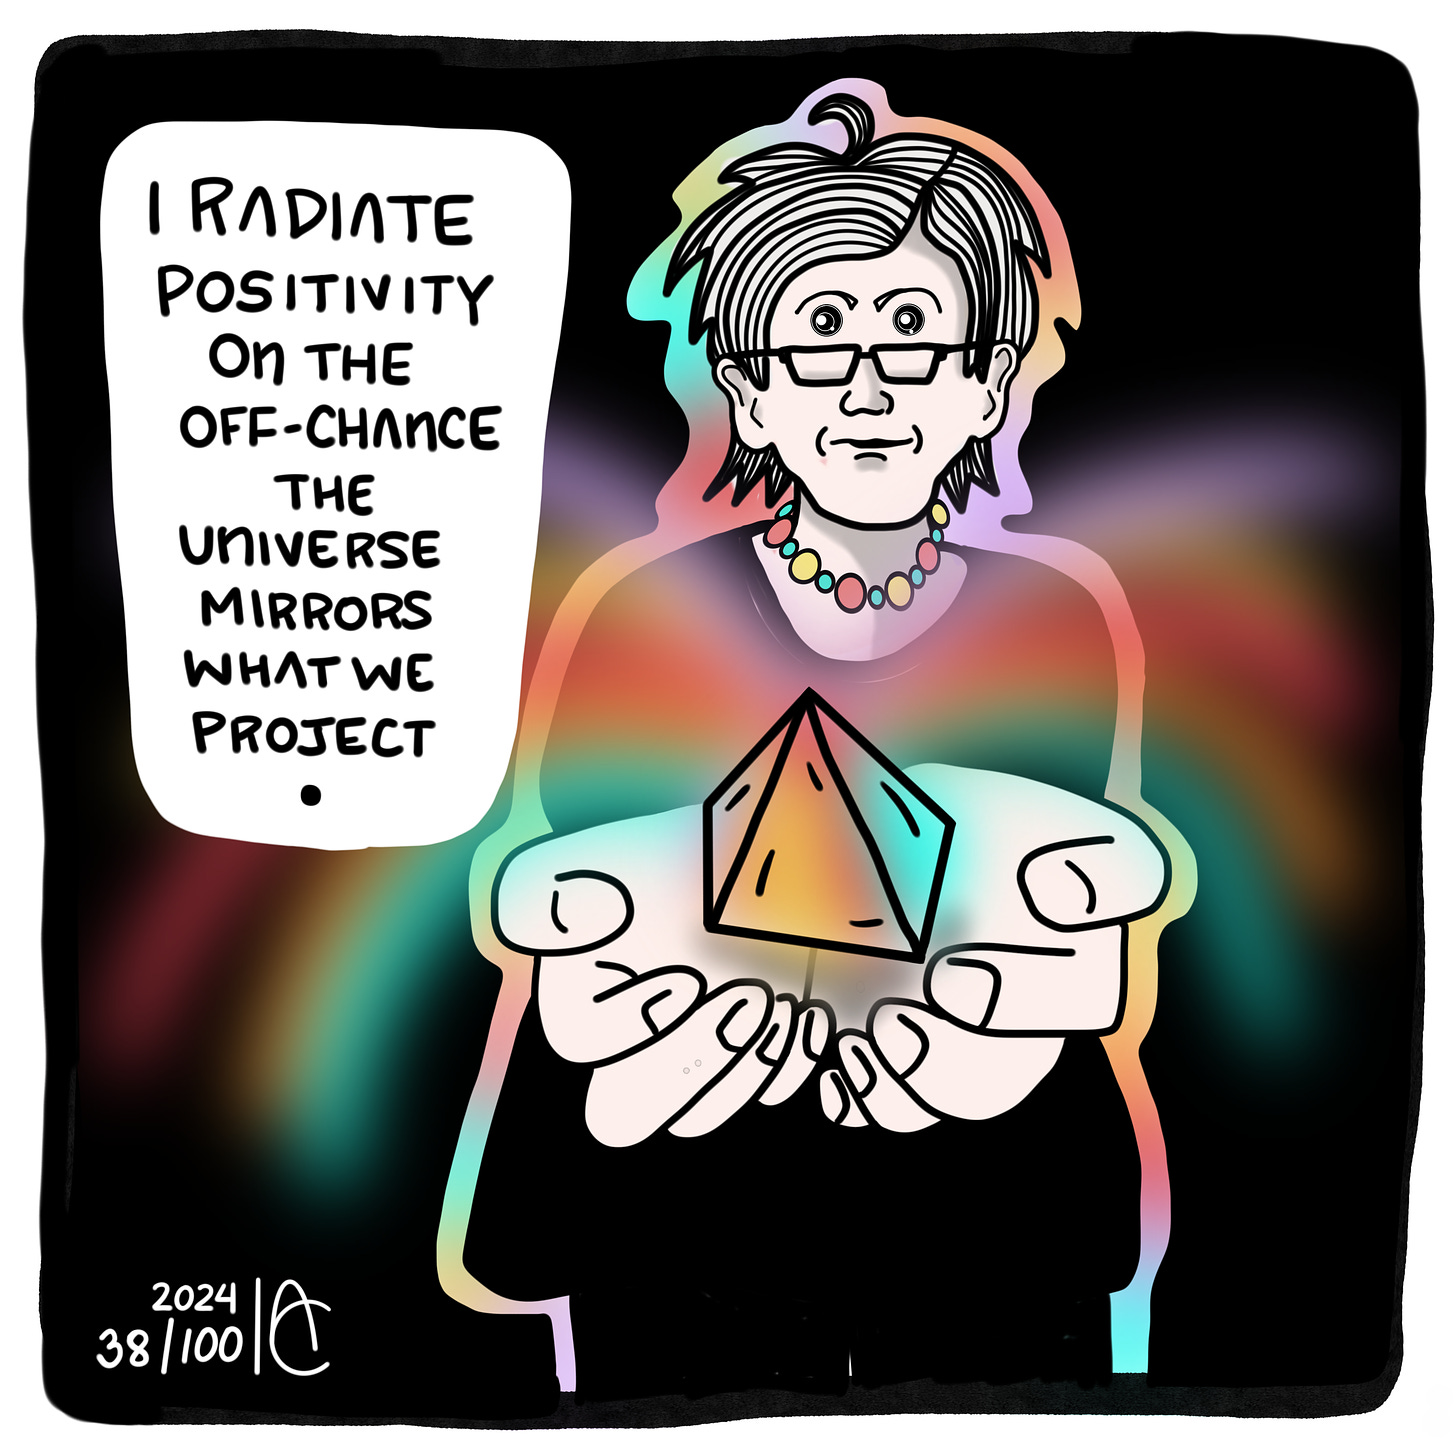 38/100:  I radiate positivity on the off-chance the universe mirrors what we project.